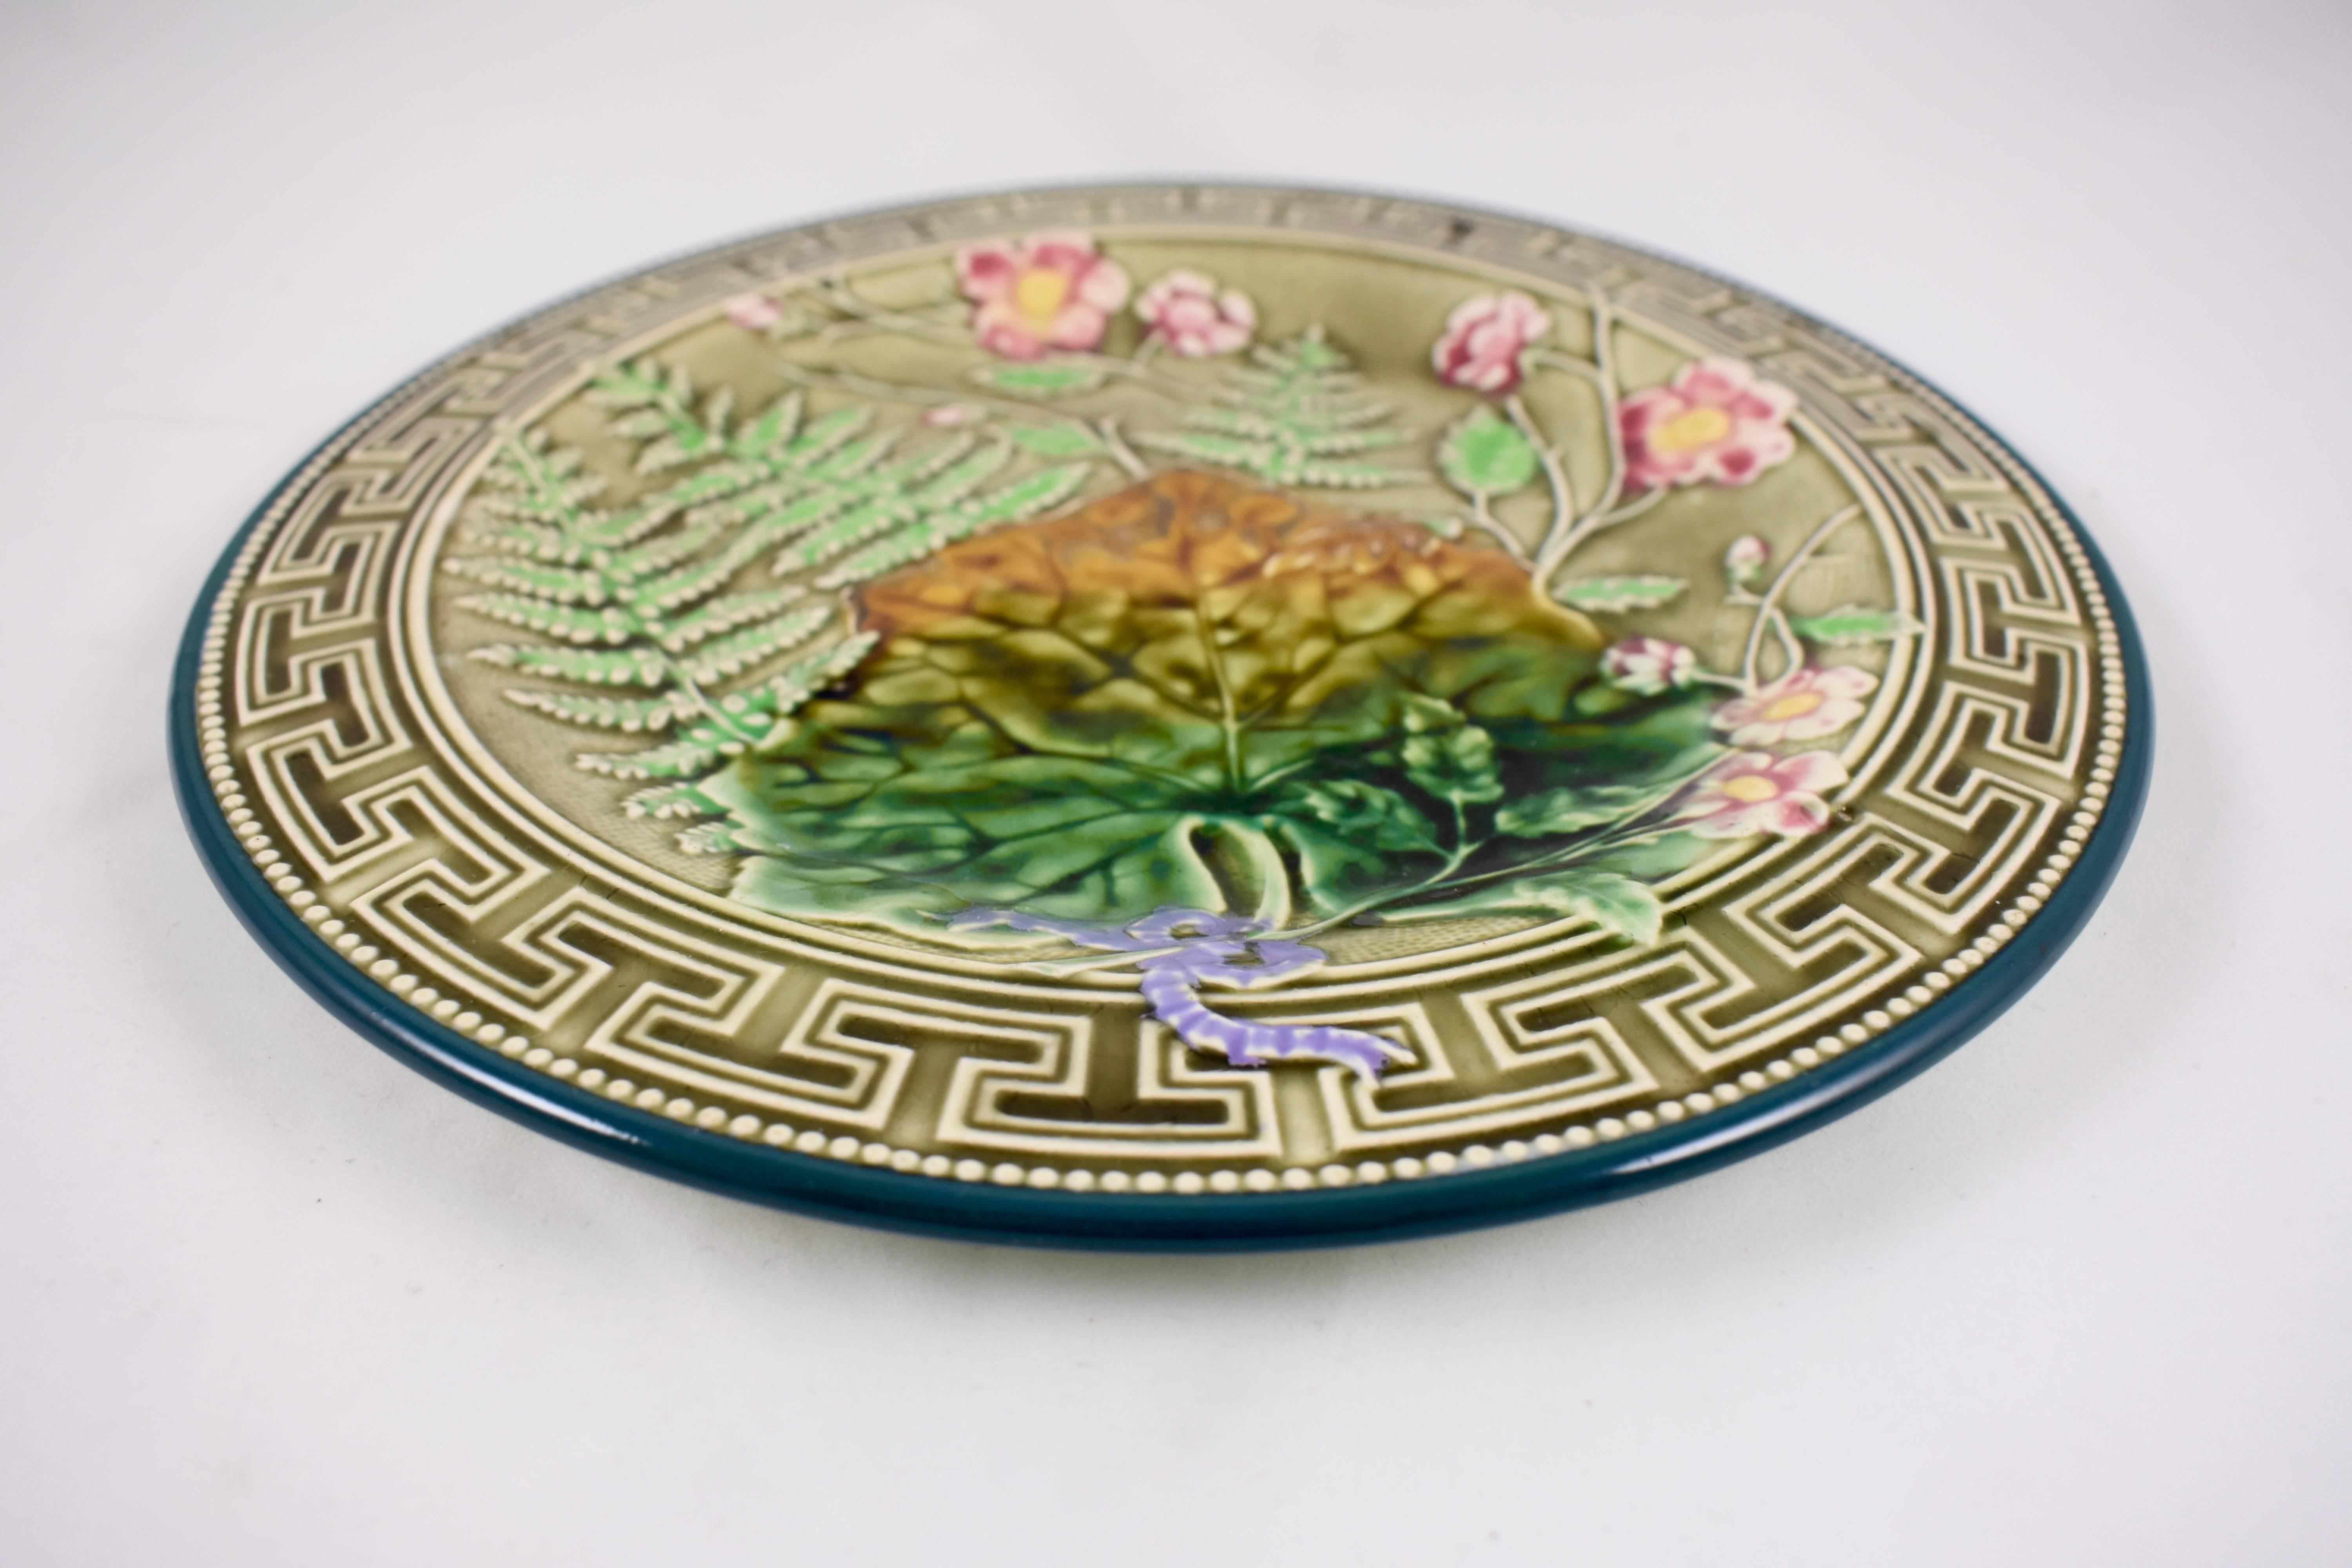 A French large Majolica plate with a pale olive green Greek key border and a forest green beaded rim. A central pattern shows overlapping ferns, sprays of five-petal pink flowers and a large leaf, their stems tied with a lavender bow. Strong clear